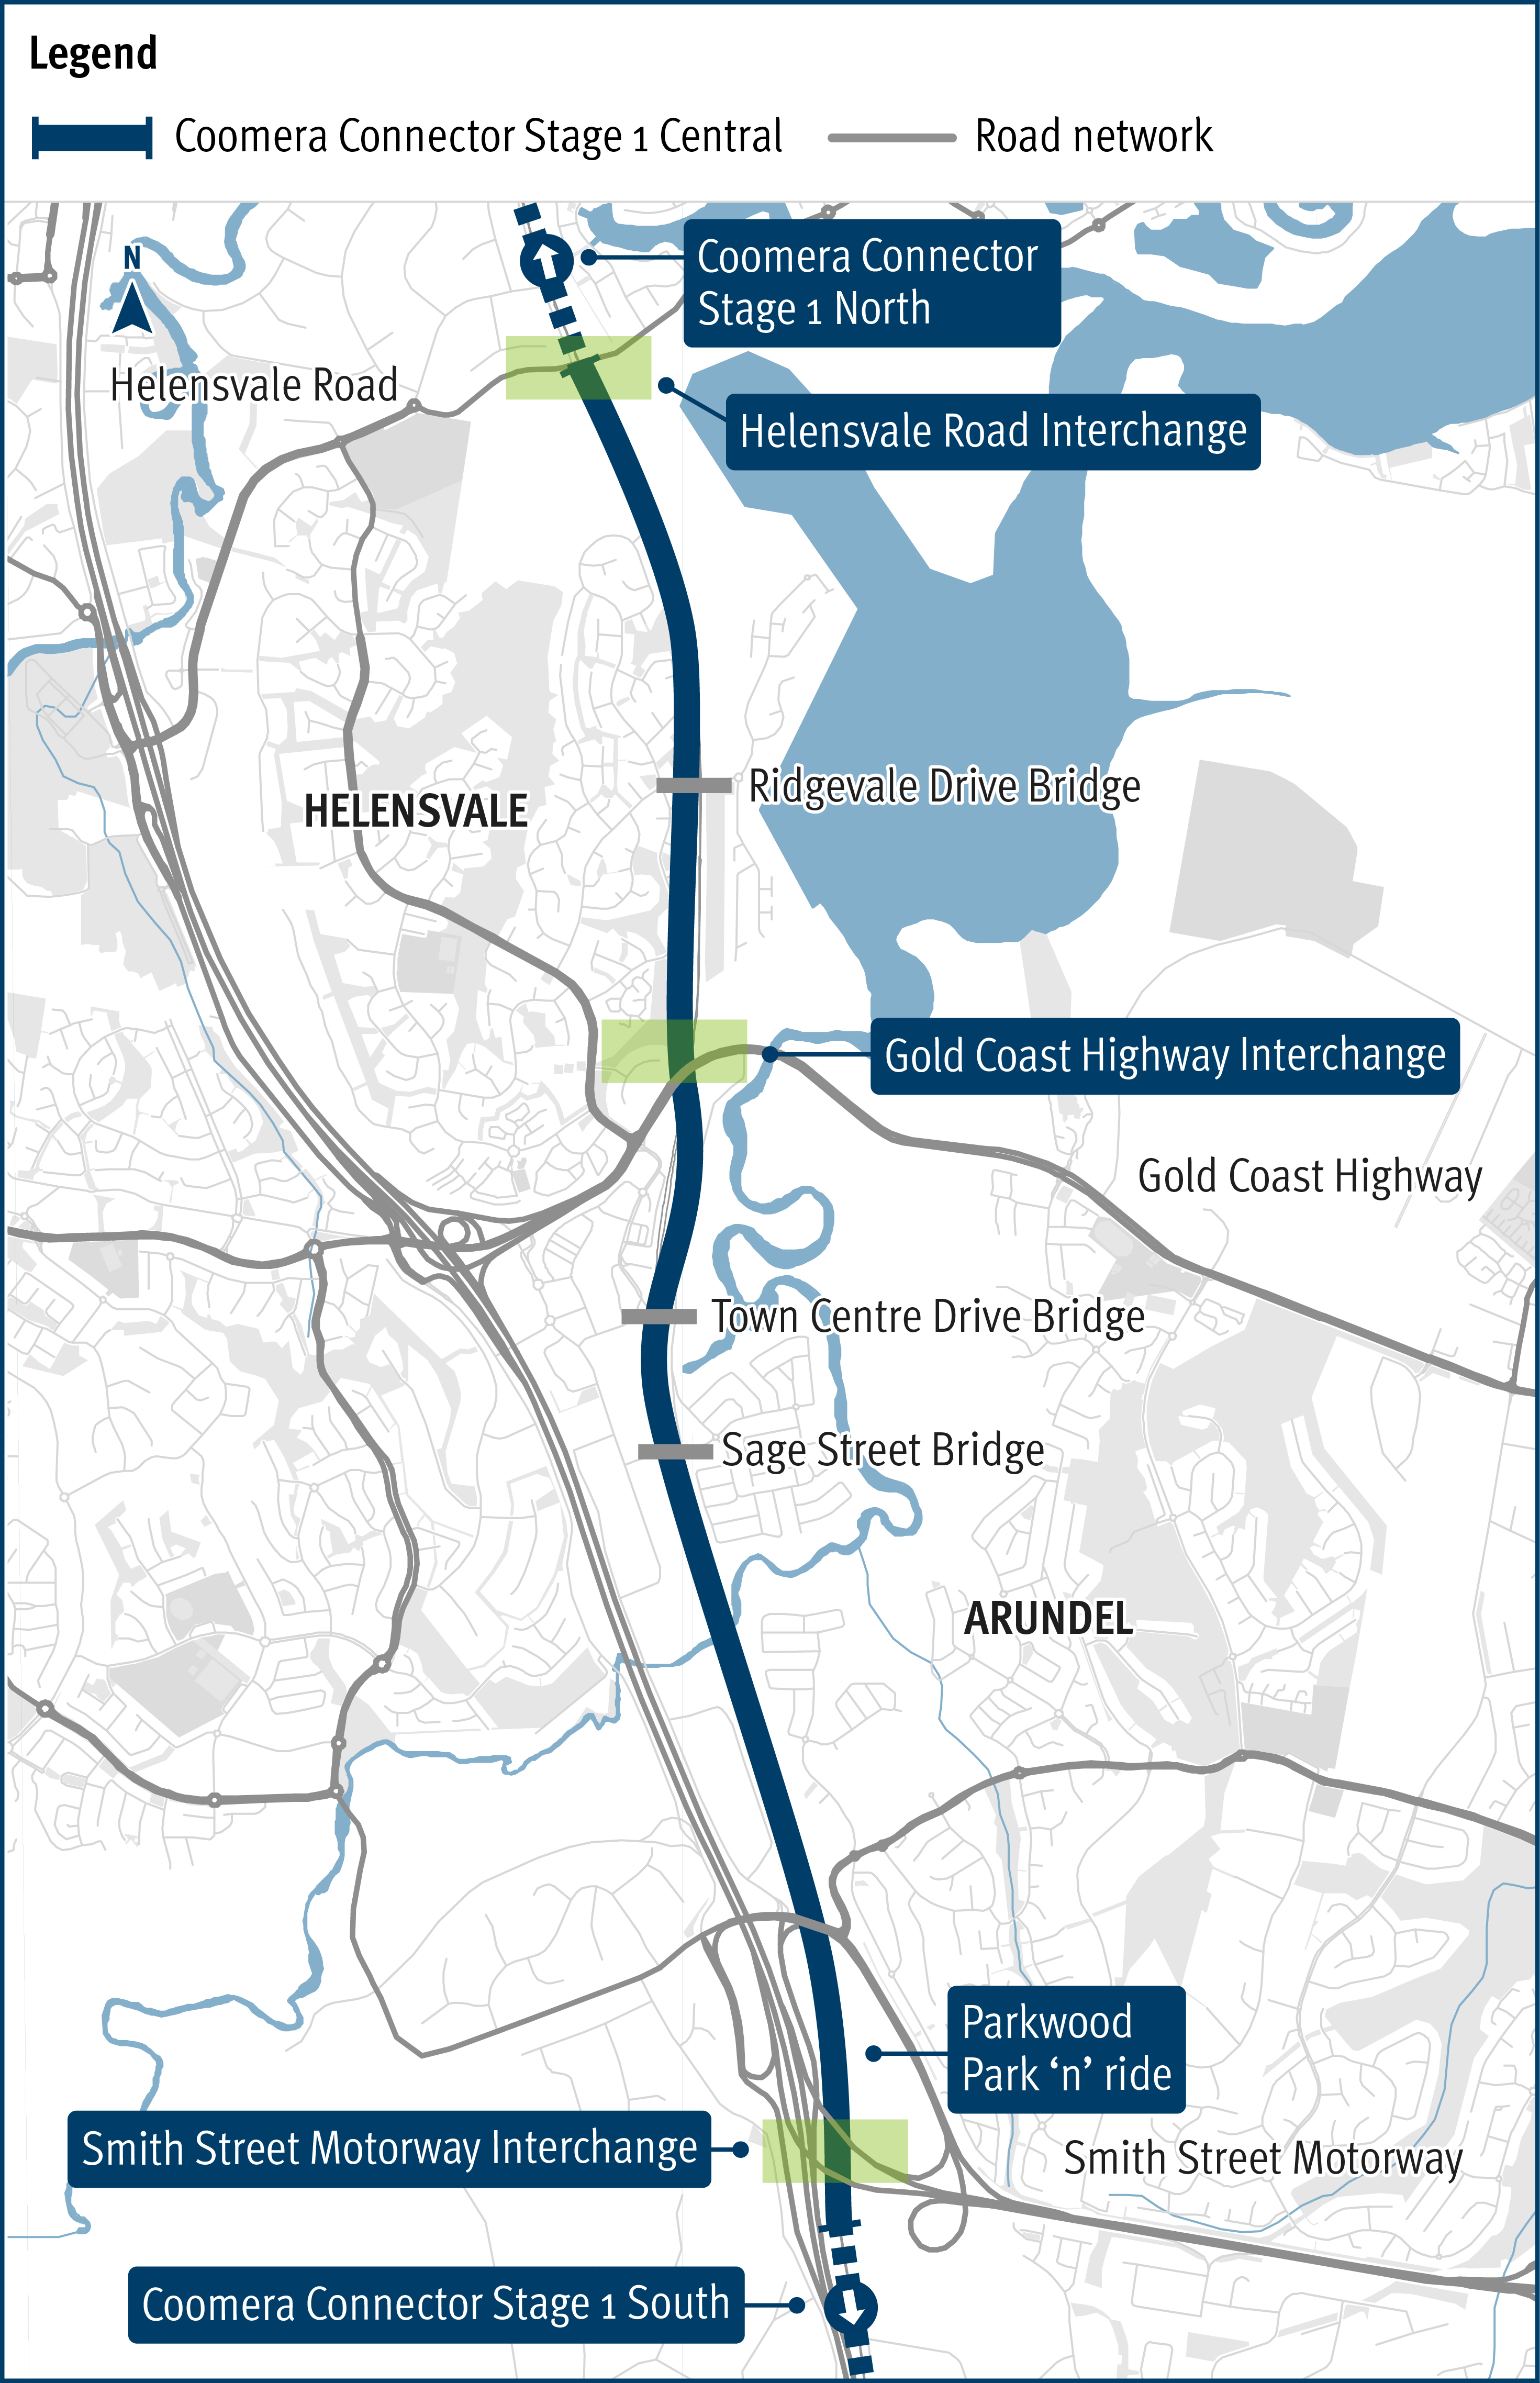 Coomera Connector Stage 1 Central project map